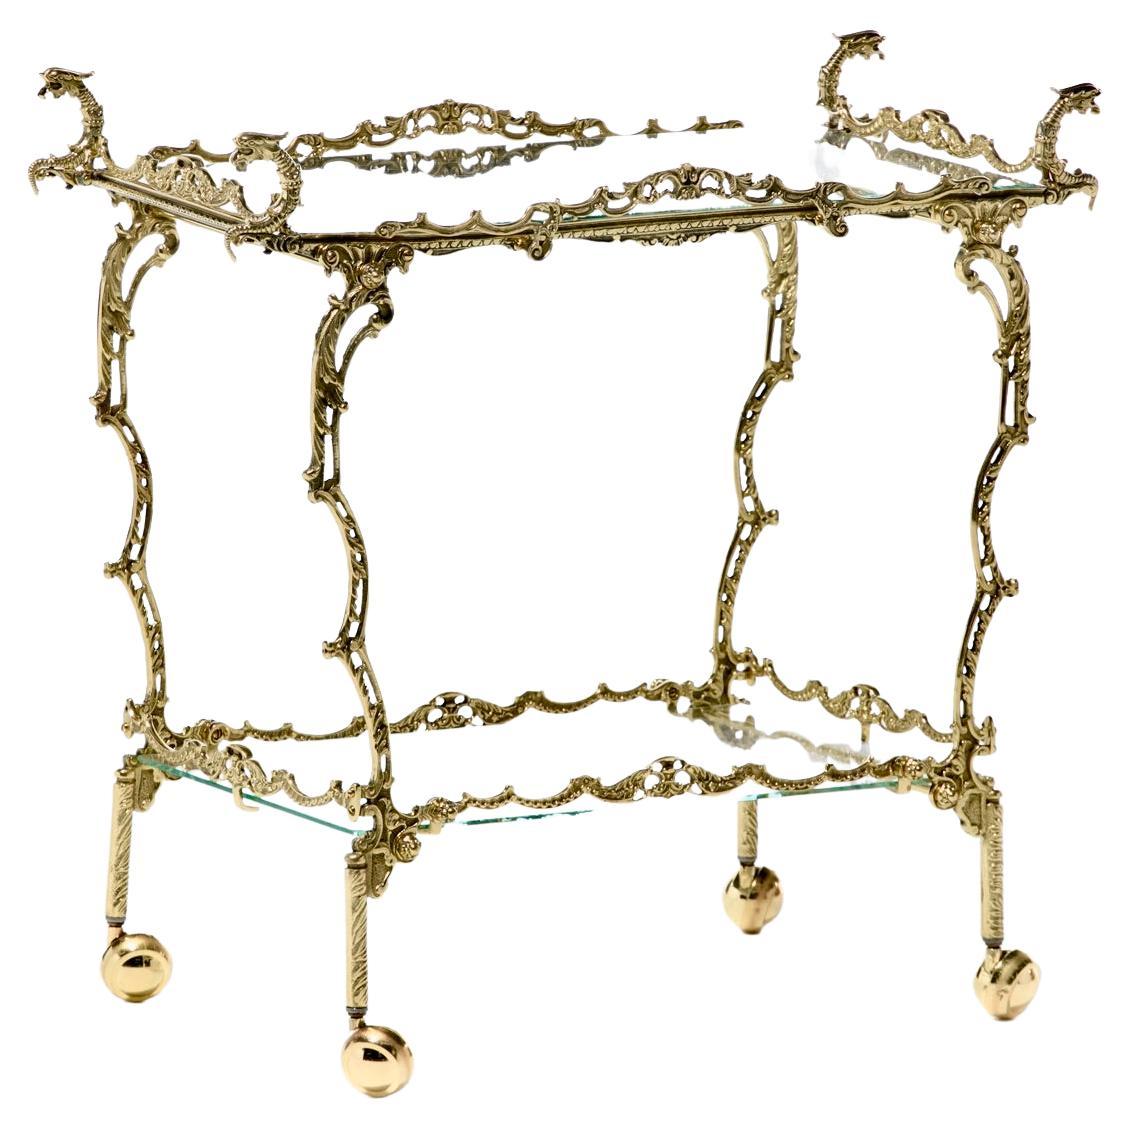 Hollywood Regency Ornate Chinoiserie Polished Brass Bar Cart c. 1955 For Sale